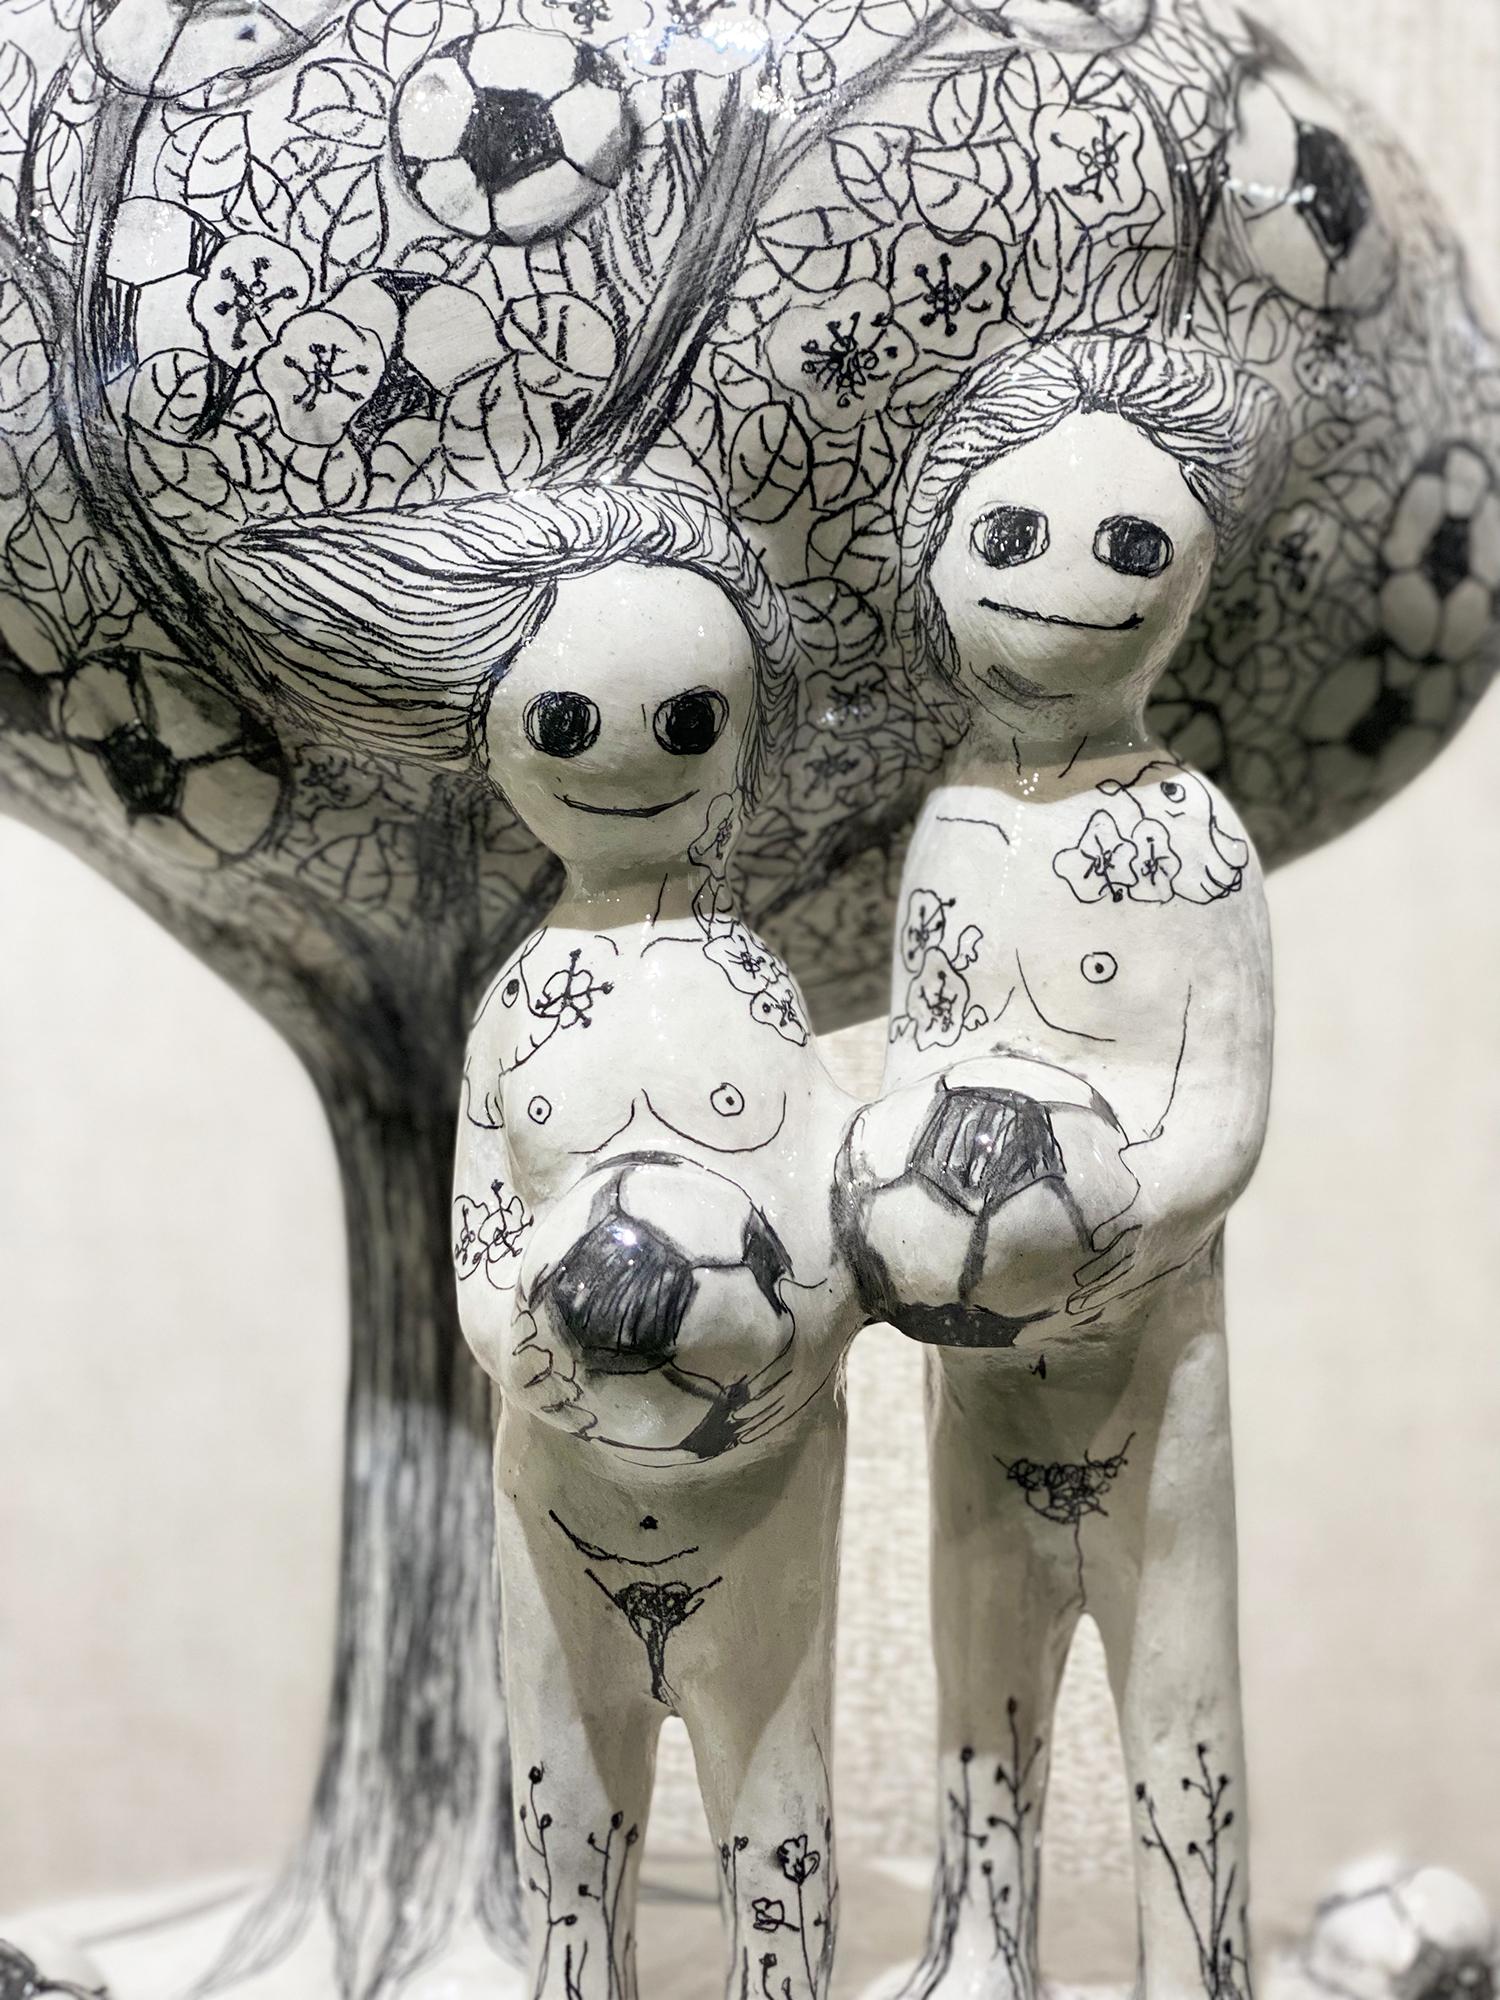 In the beginning there was soccer, figurative drawing sculpture, Adam and Eve  - Art by Sungrea Kim